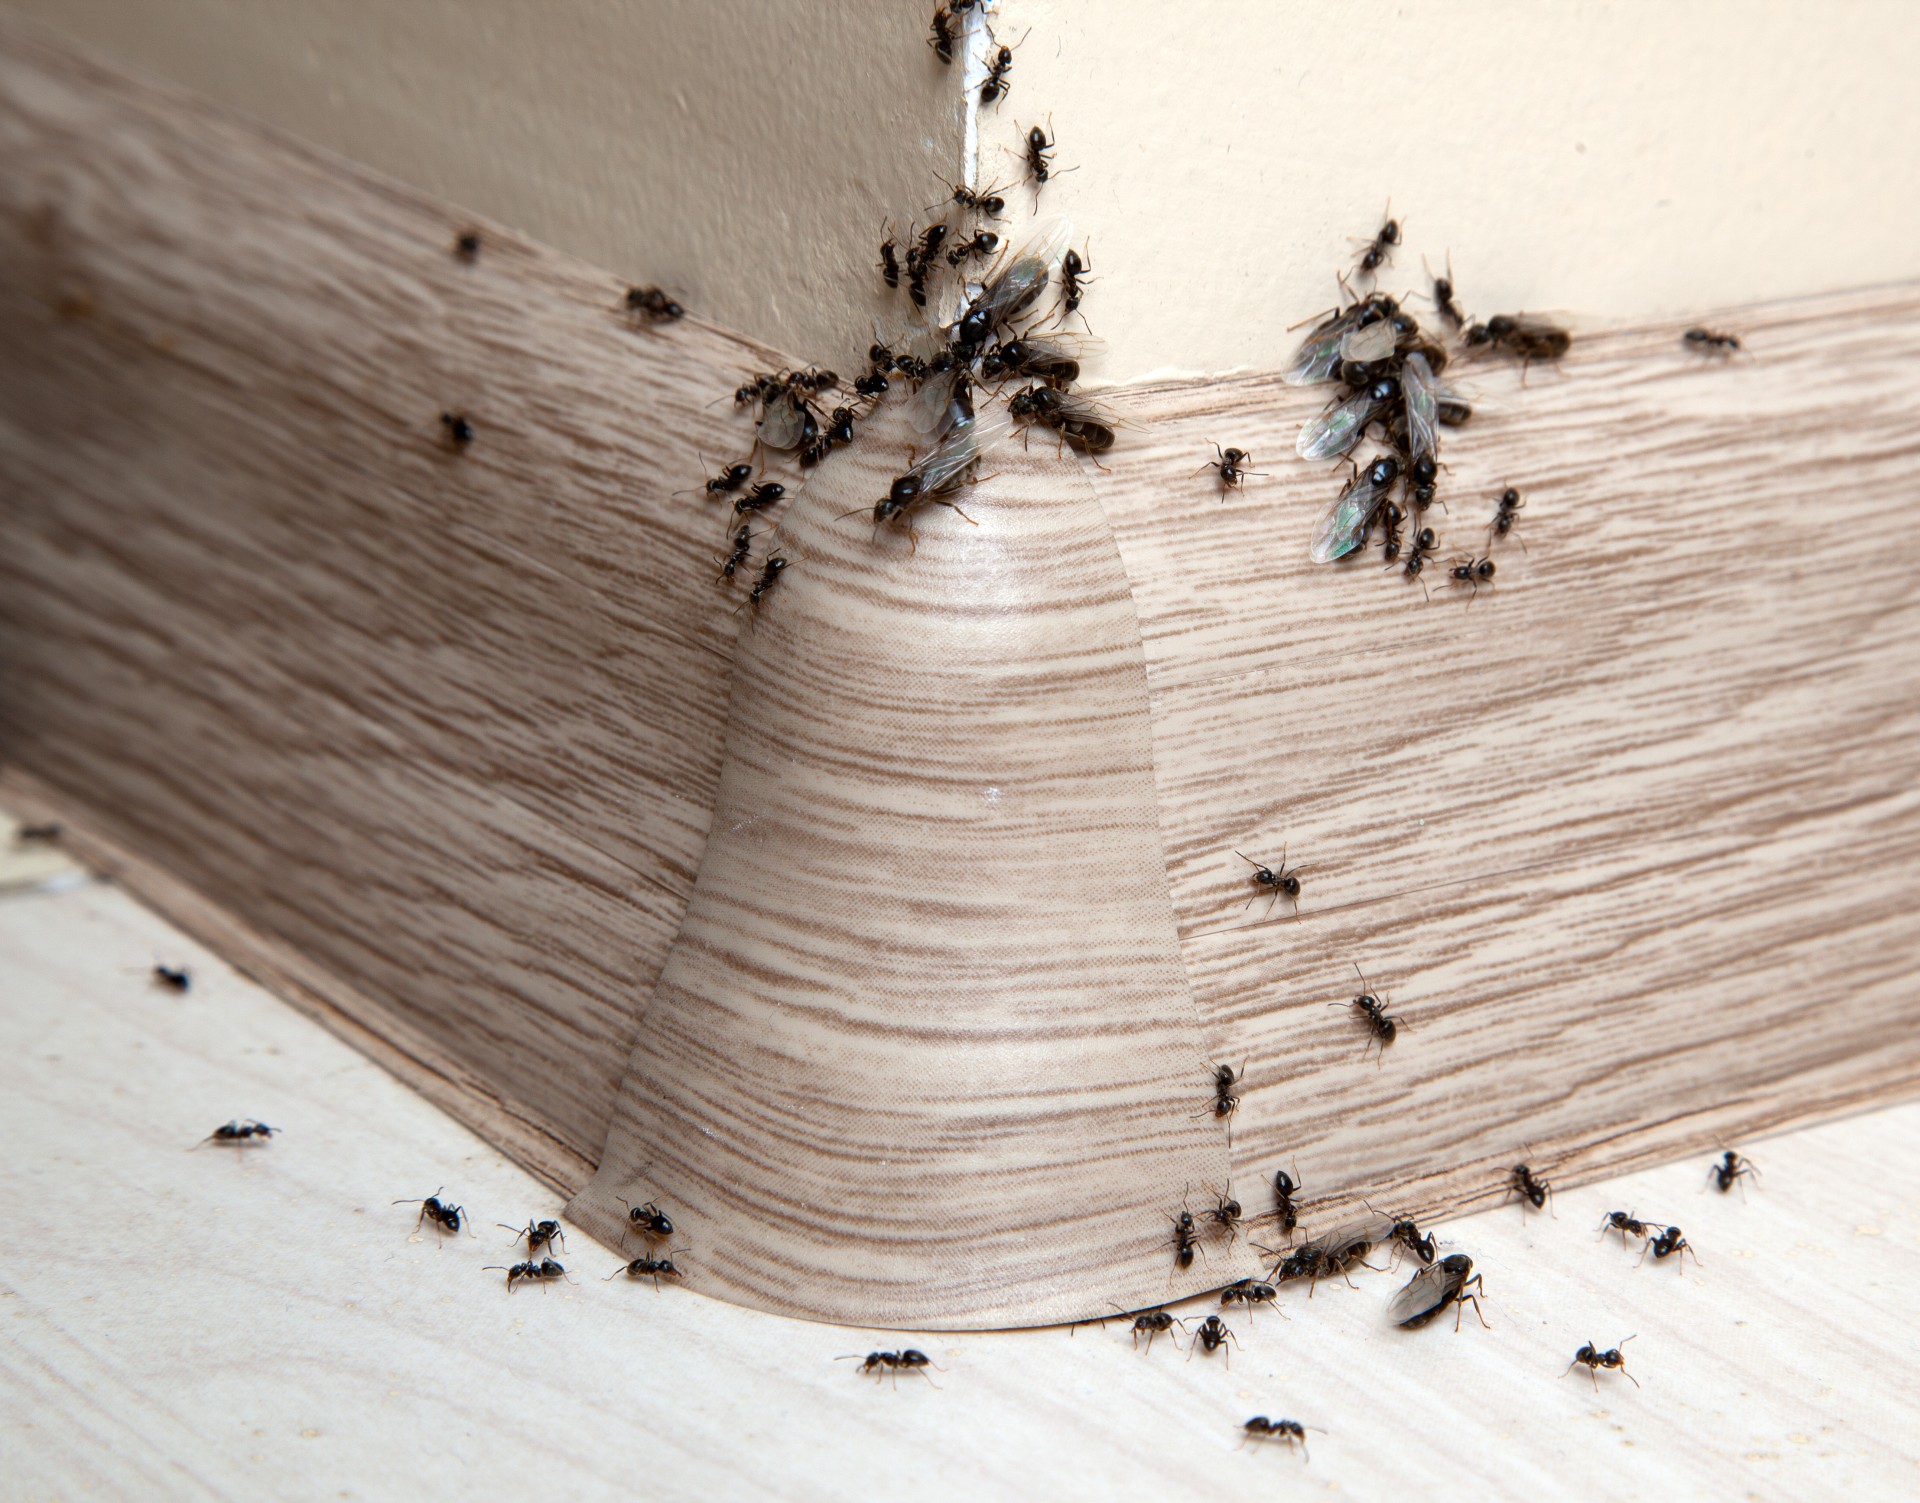 Ant Infestation, Pest Control in Poplar, Isle of Dogs, Millwall, E14. Call Now 020 8166 9746